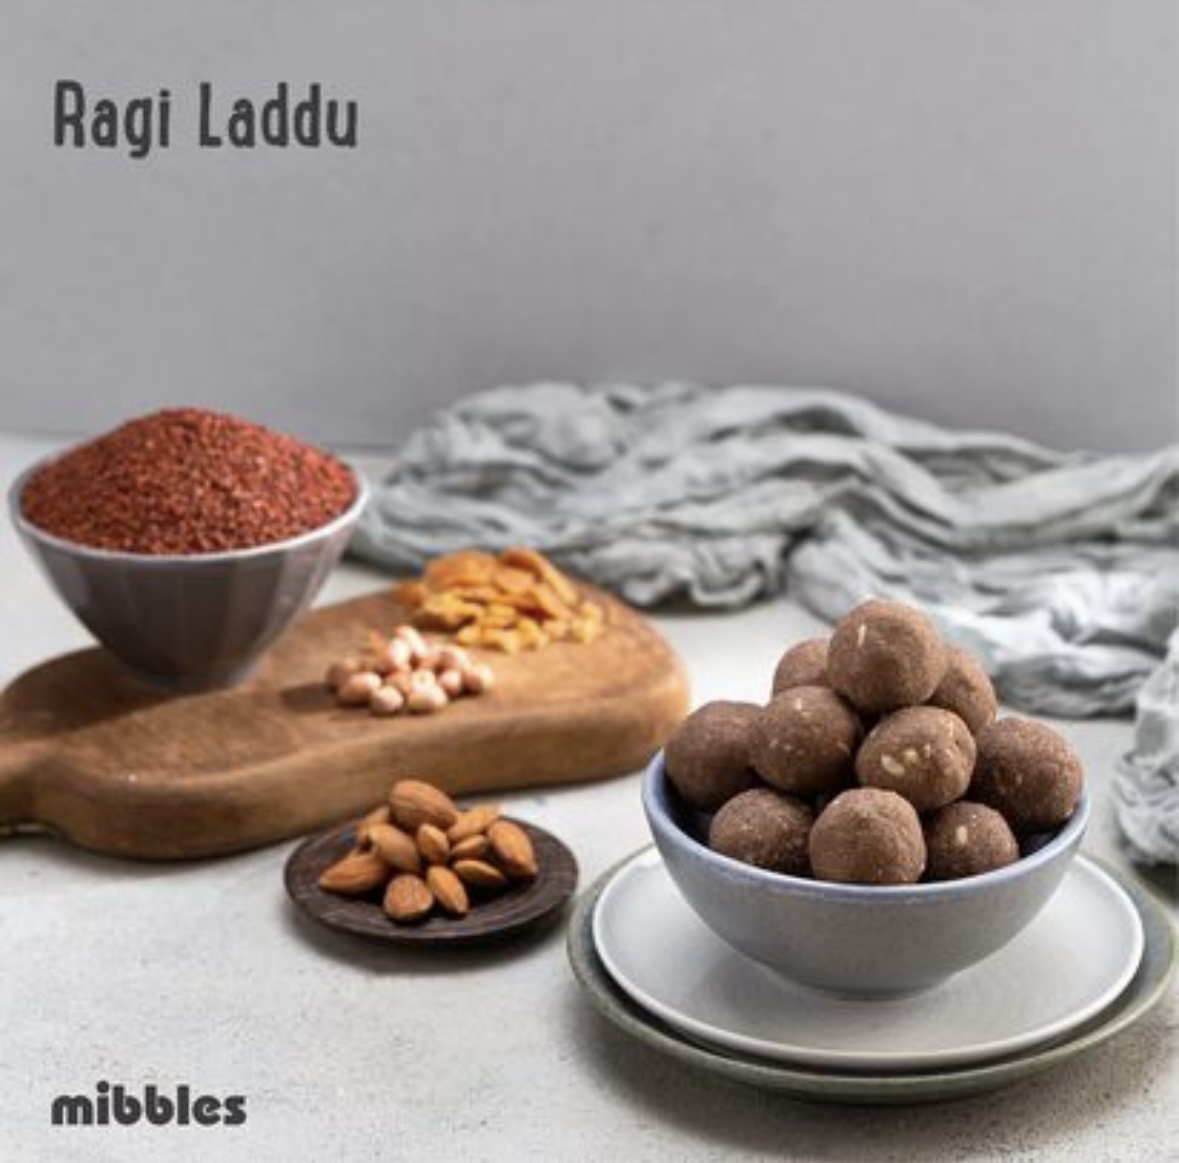 Tasty Dishes you can make with Ragi!